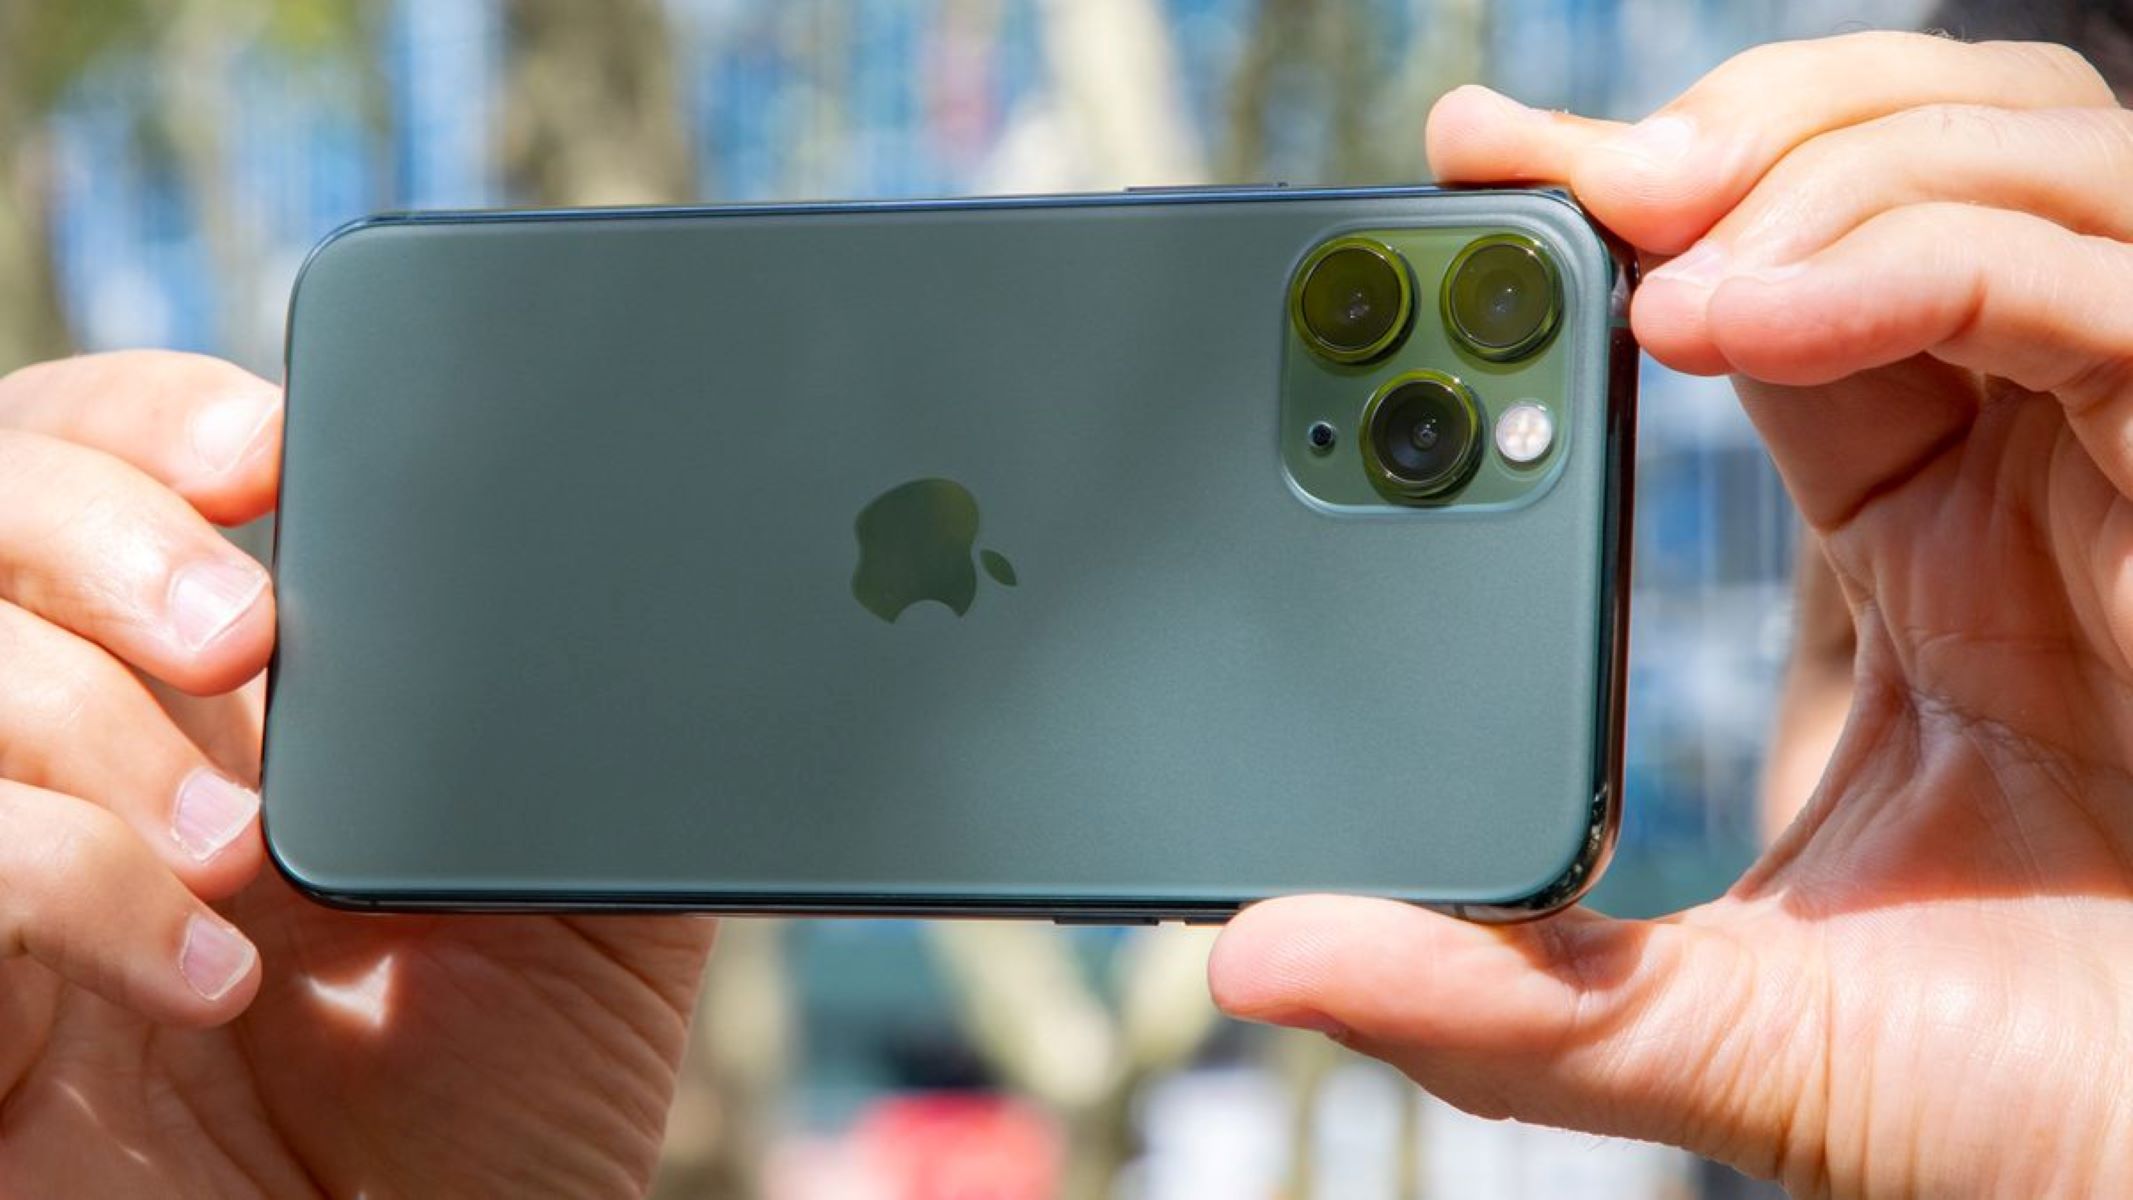 4K Photography On IPhone 11: Capturing High-Resolution Moments With Your Camera